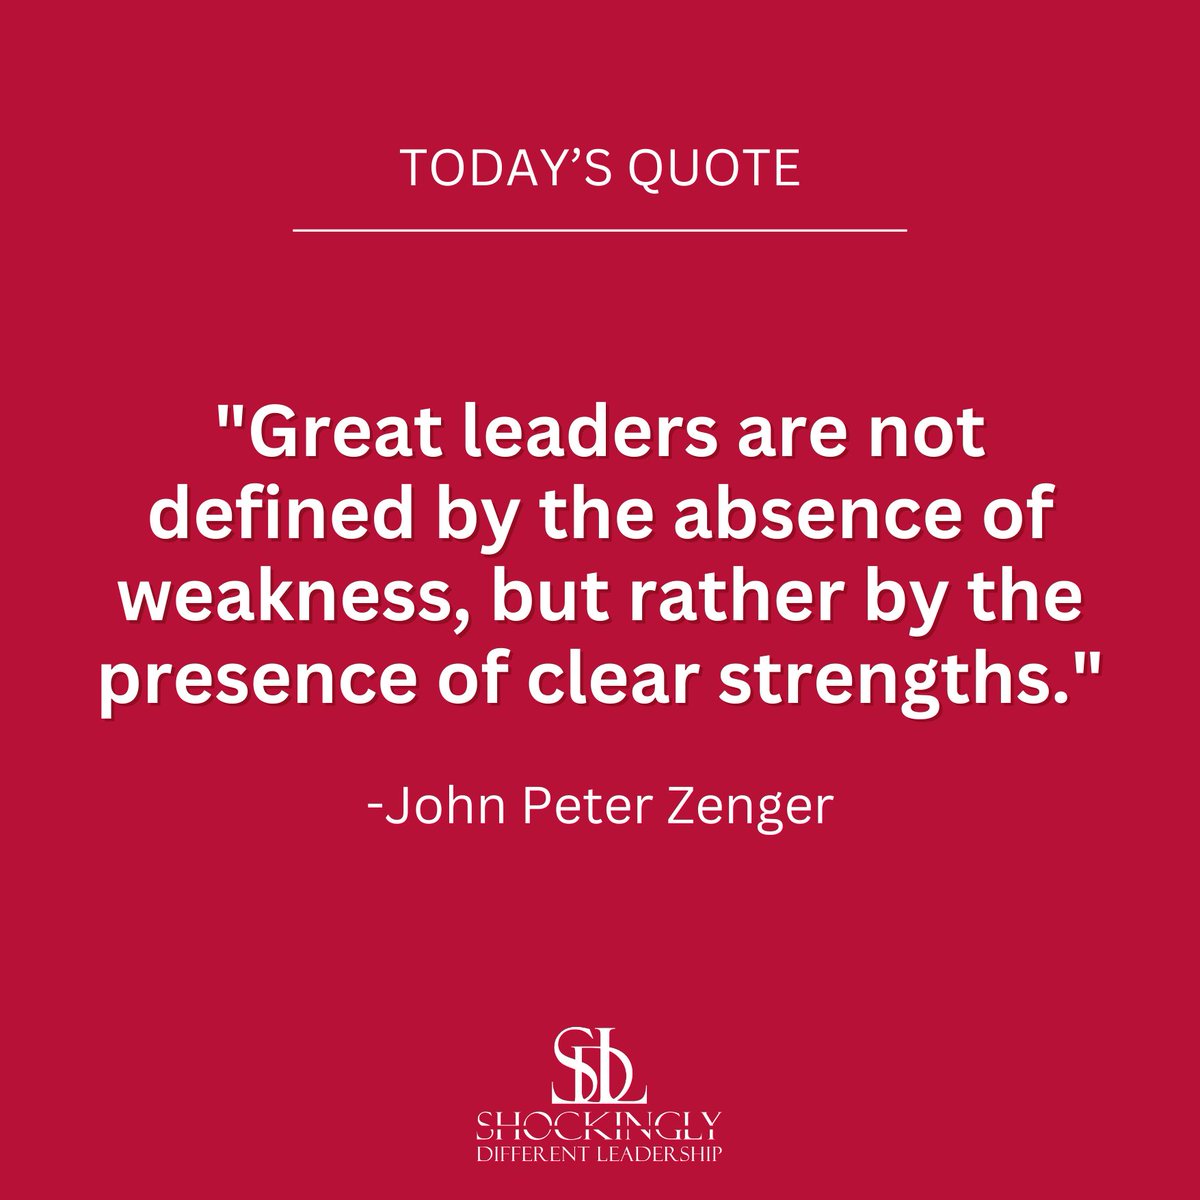 𝐋𝐞𝐚𝐝𝐢𝐧𝐠 𝐰𝐢𝐭𝐡 𝐬𝐭𝐫𝐞𝐧𝐠𝐭𝐡, not absence of weakness. 

At Shockingly Different Leadership, we celebrate the power of strengths that drive exceptional leaders. 

#LeadershipJourney #Leadership #LeadershipExcellence #SDLLeadership #StrengthsInLeadership